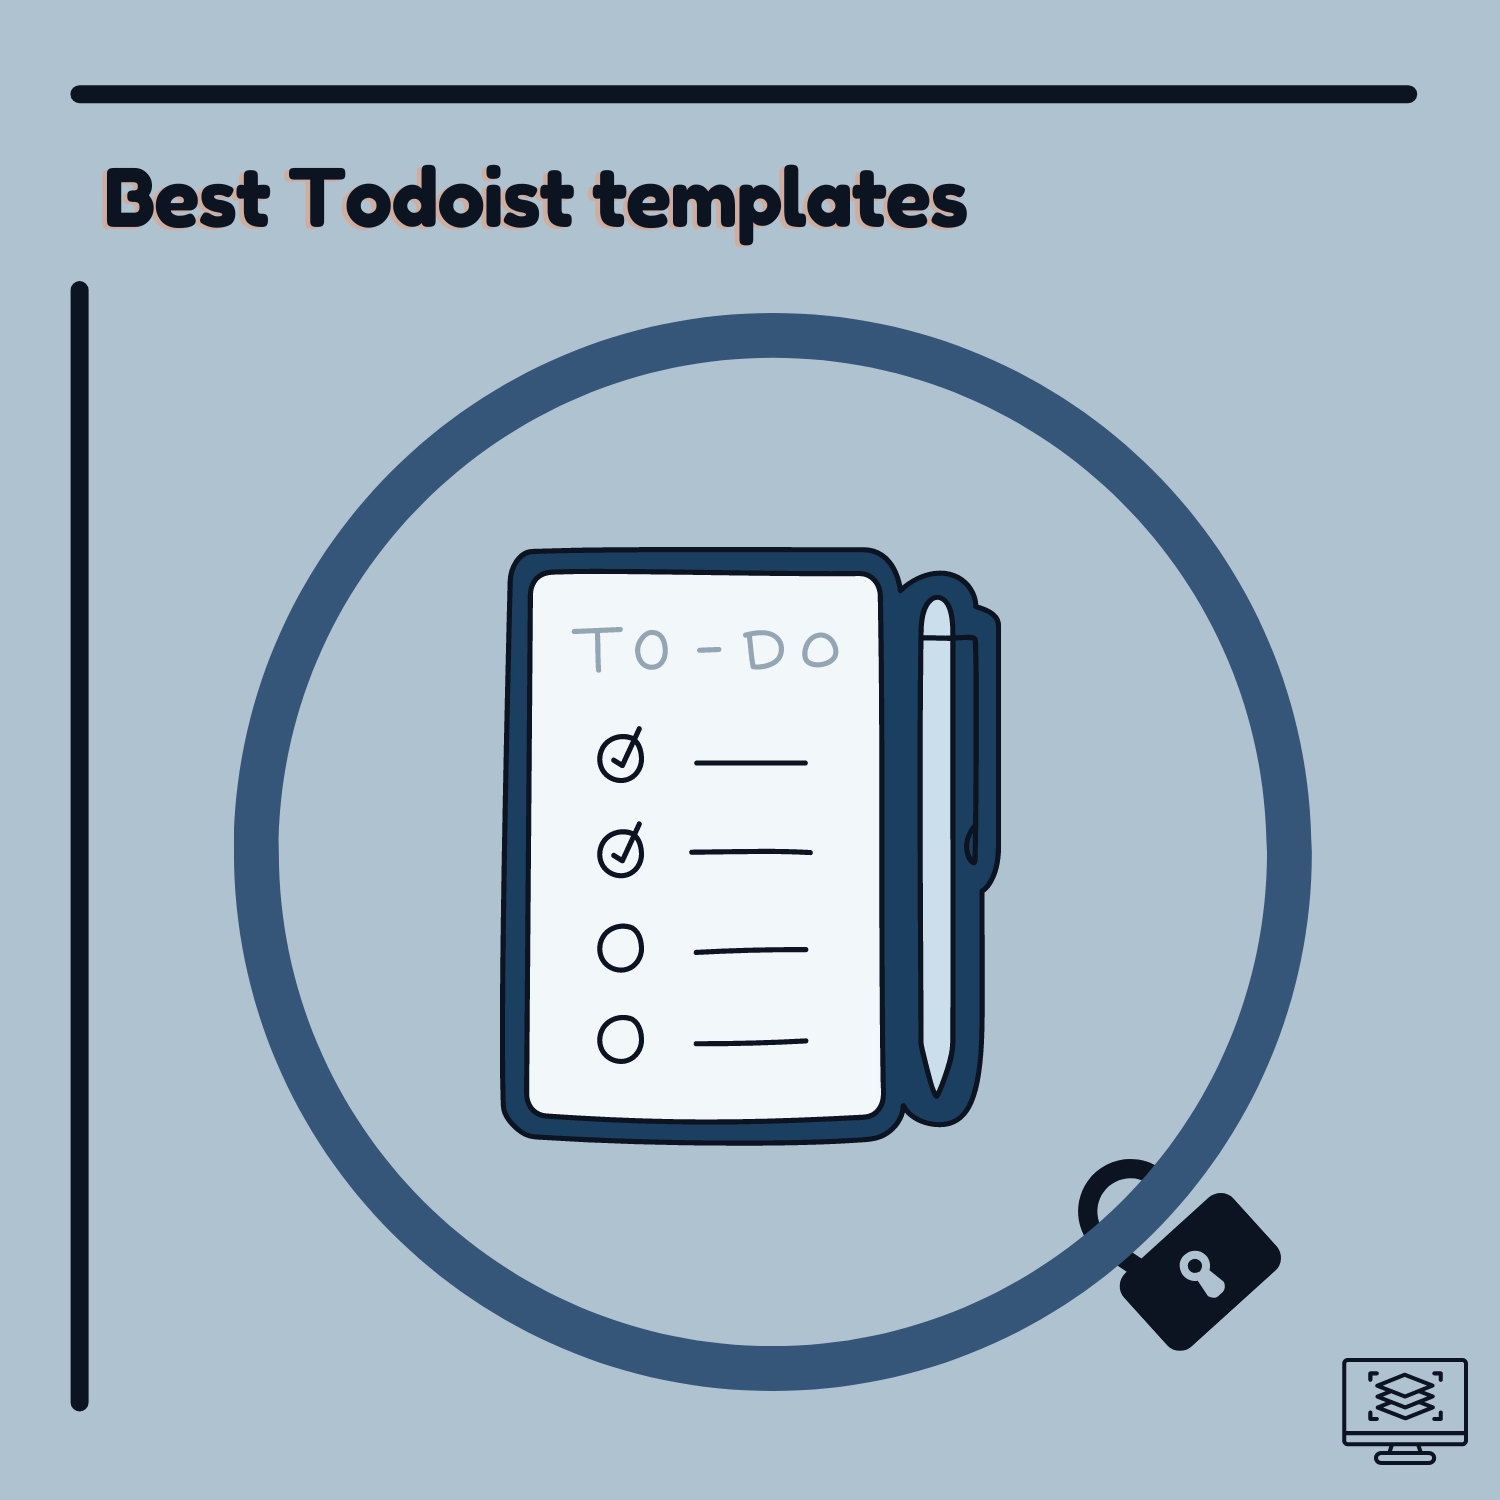 8 Best Todoist Templates to Boost Your Workflow